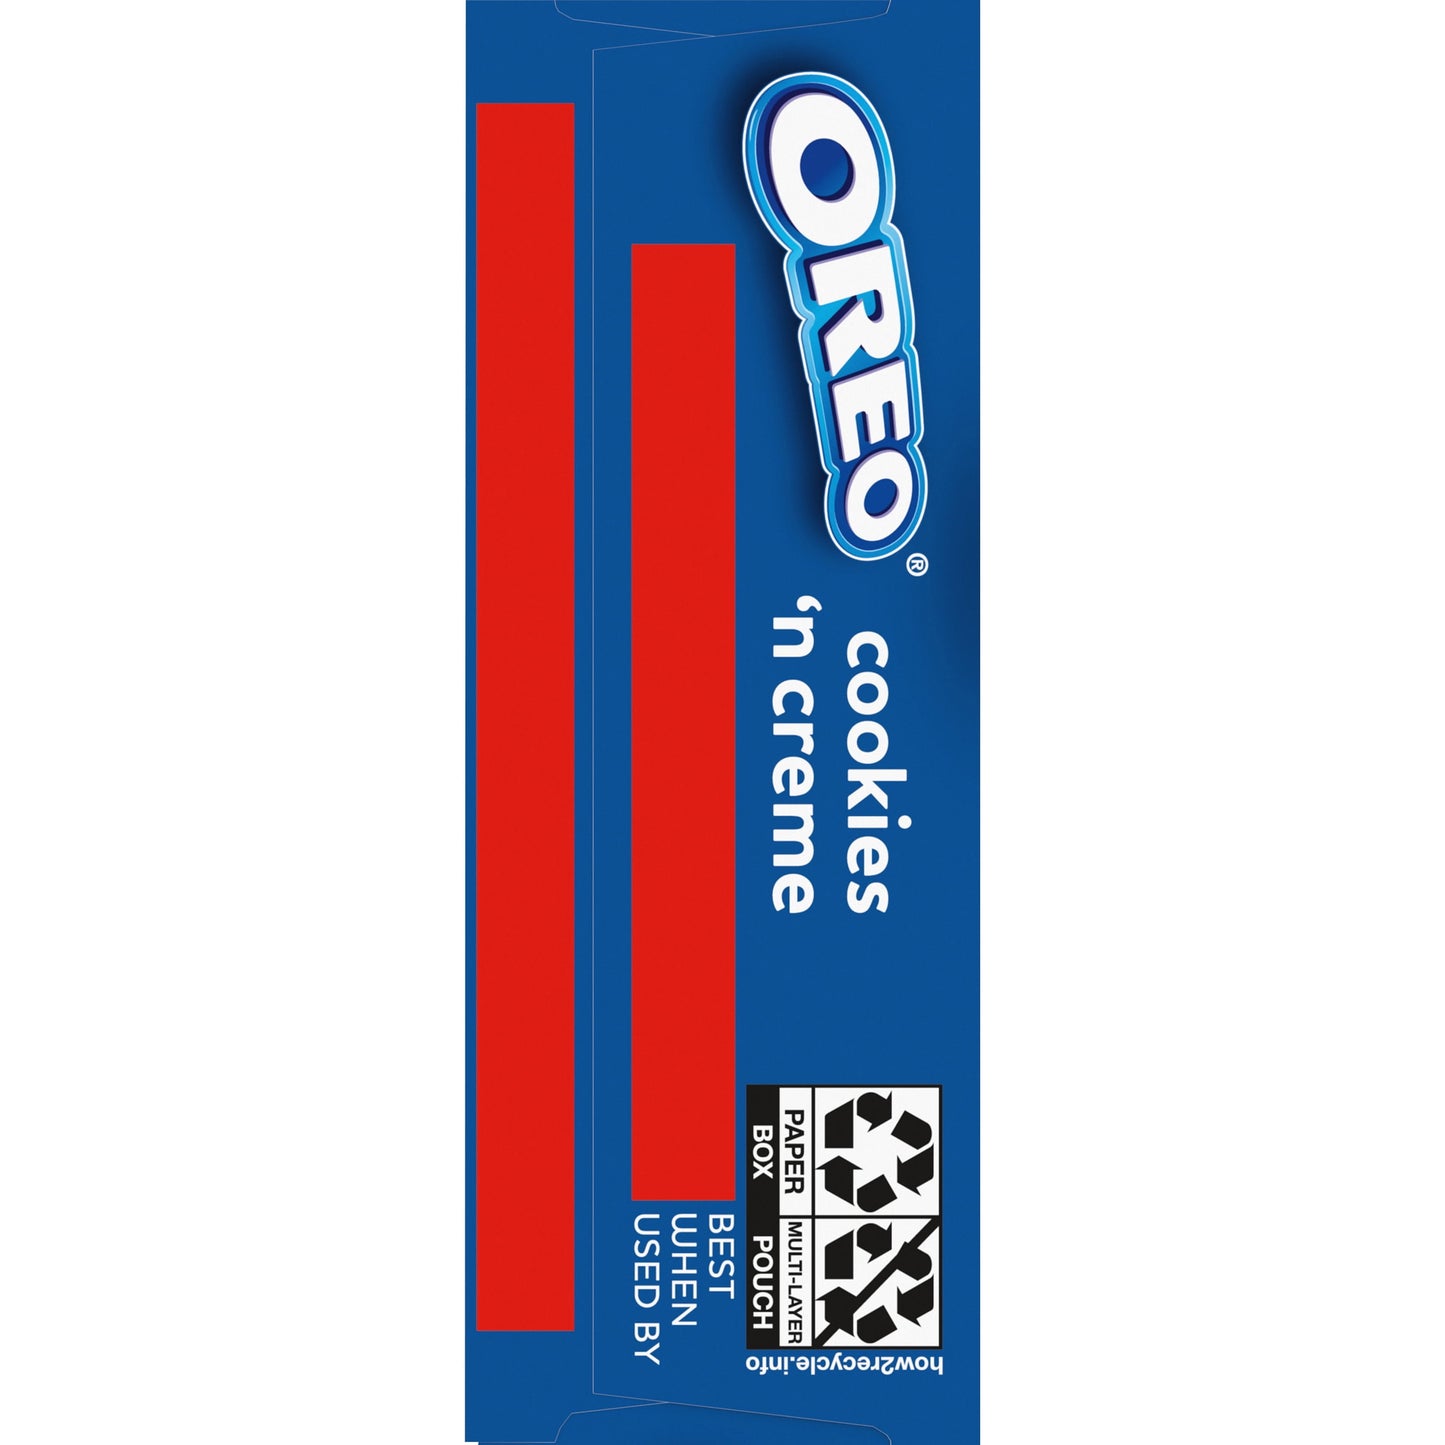 Jell-O Oreo Cookies 'n Creme Instant Pudding & Pie Filling Mix, 4.2 oz Box